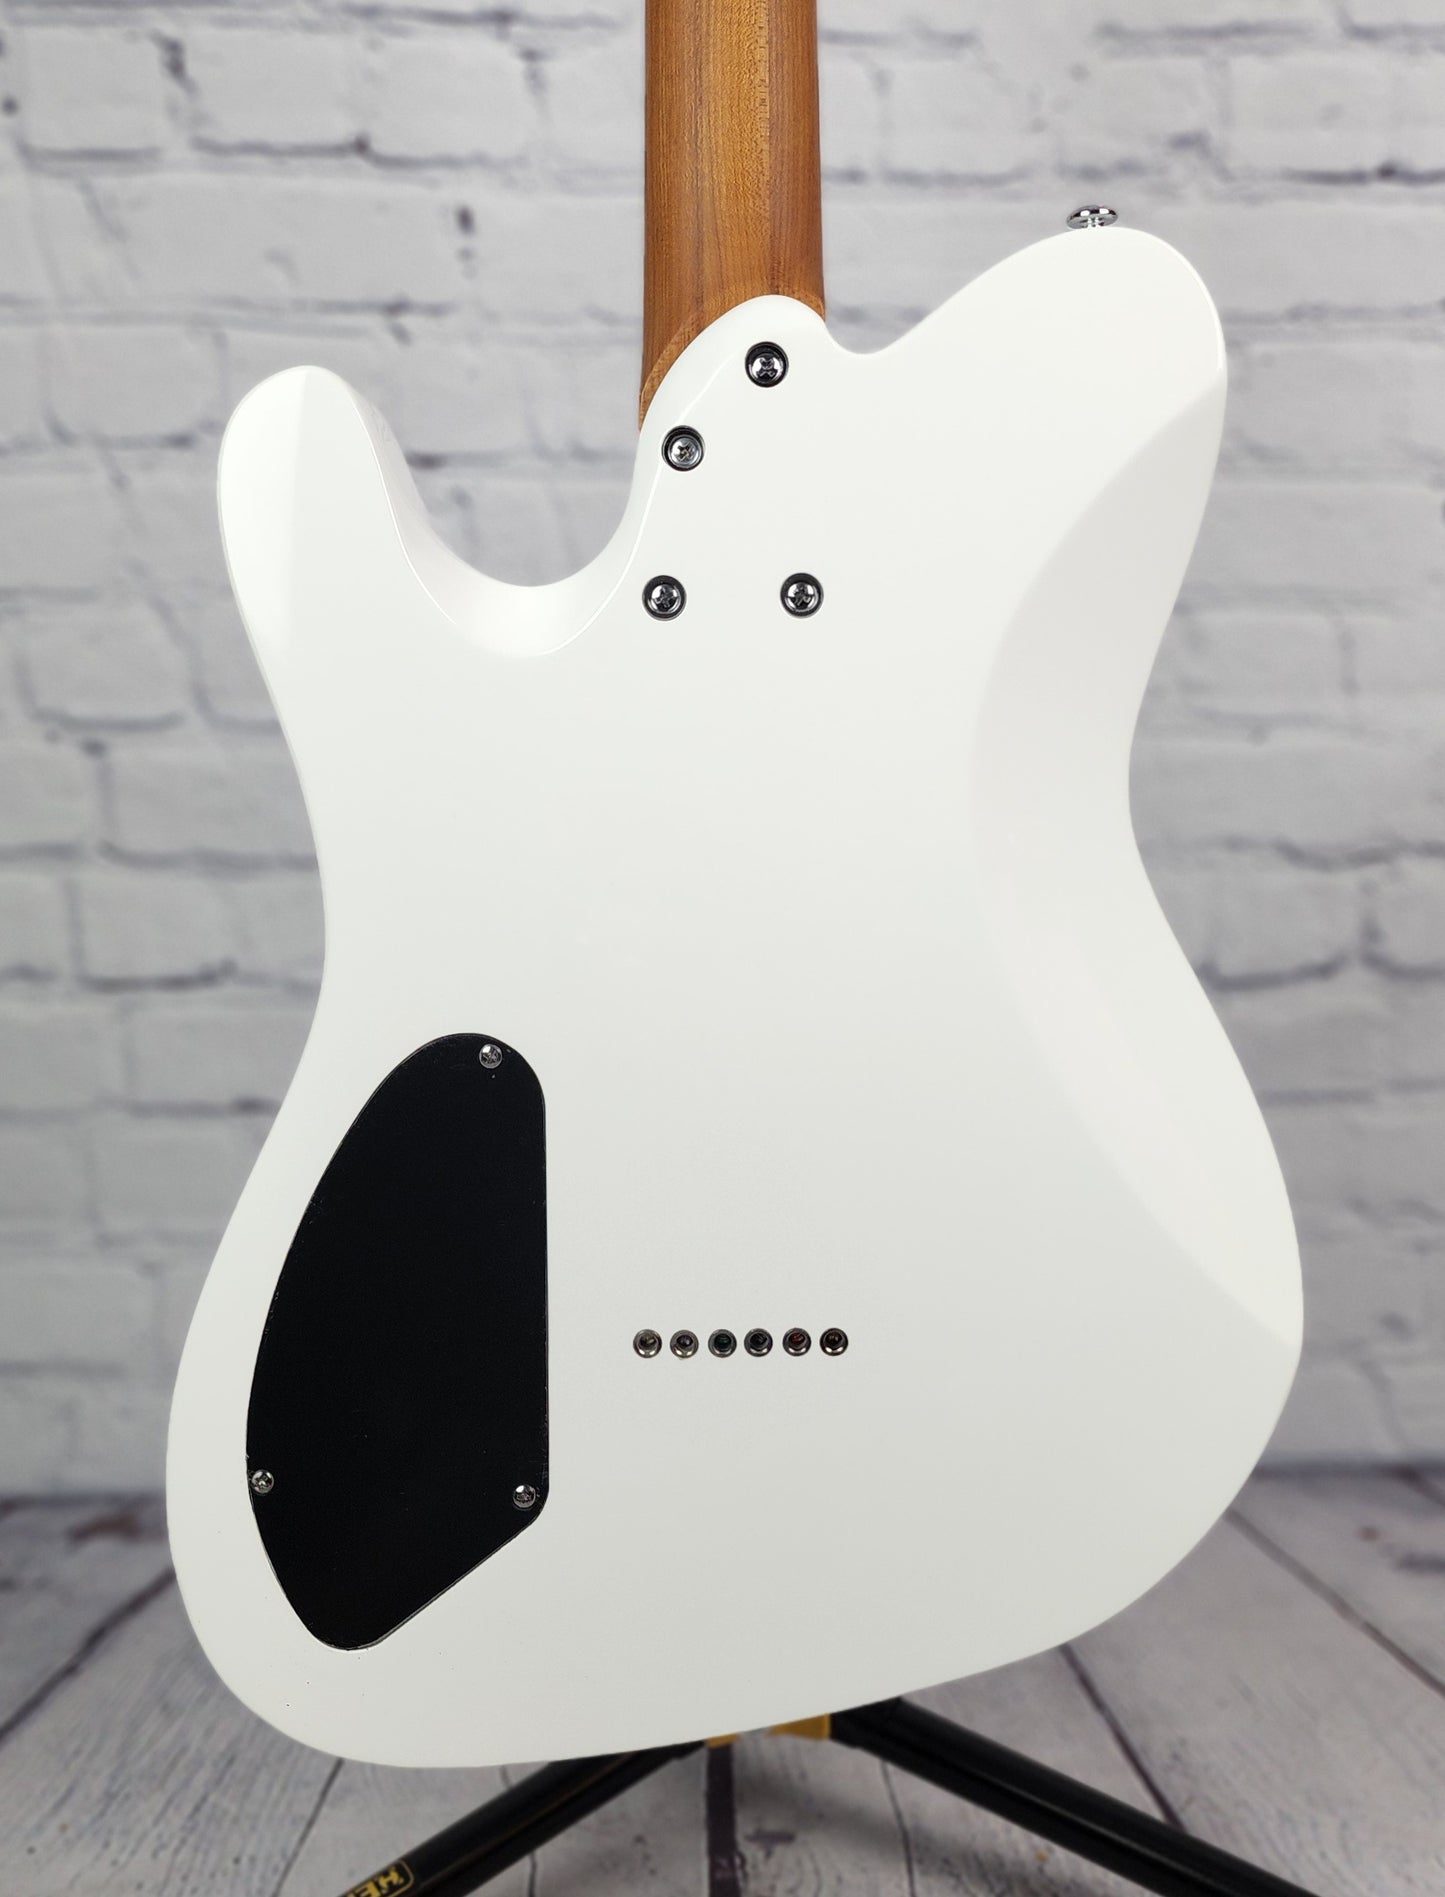 Balaguer Standard Thicket SS 6 String Electric Guitar Gloss White